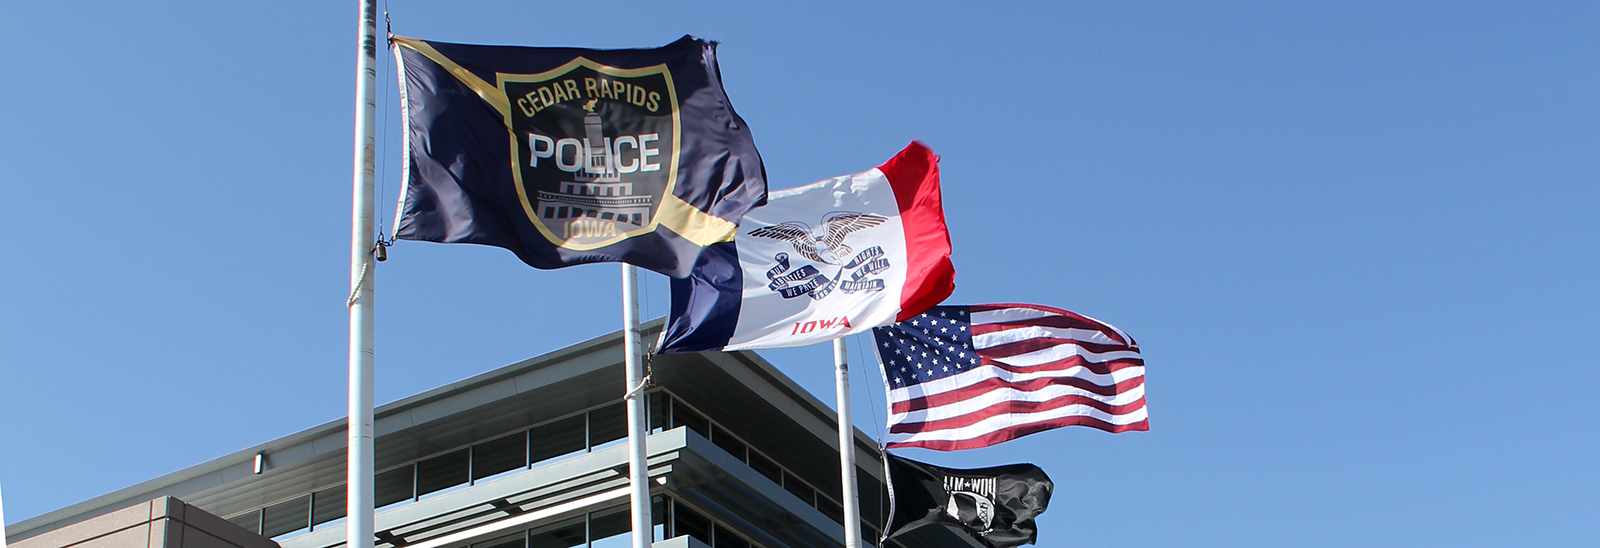 Cedar Rapids Police, State of Iowa, United States, and POW flags waving outside of Police Station